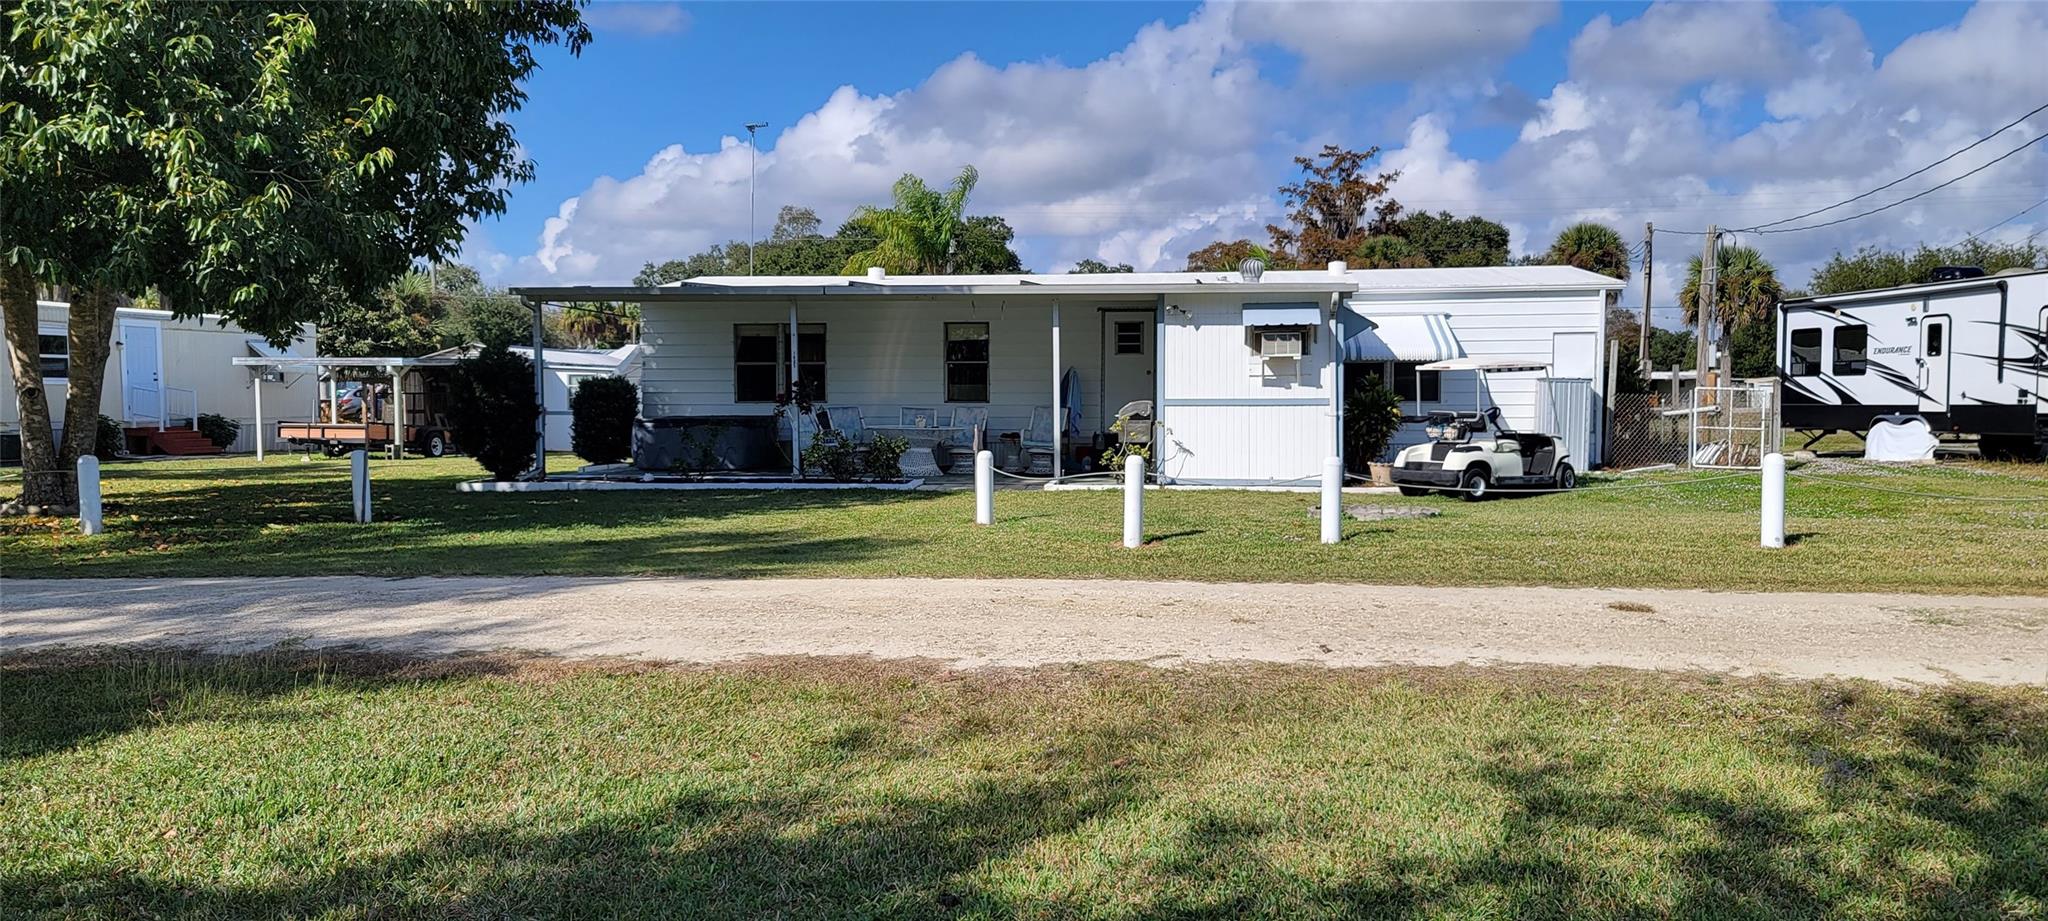 1065 Echo Ave, Other City - In The State Of Florida, FL 33471